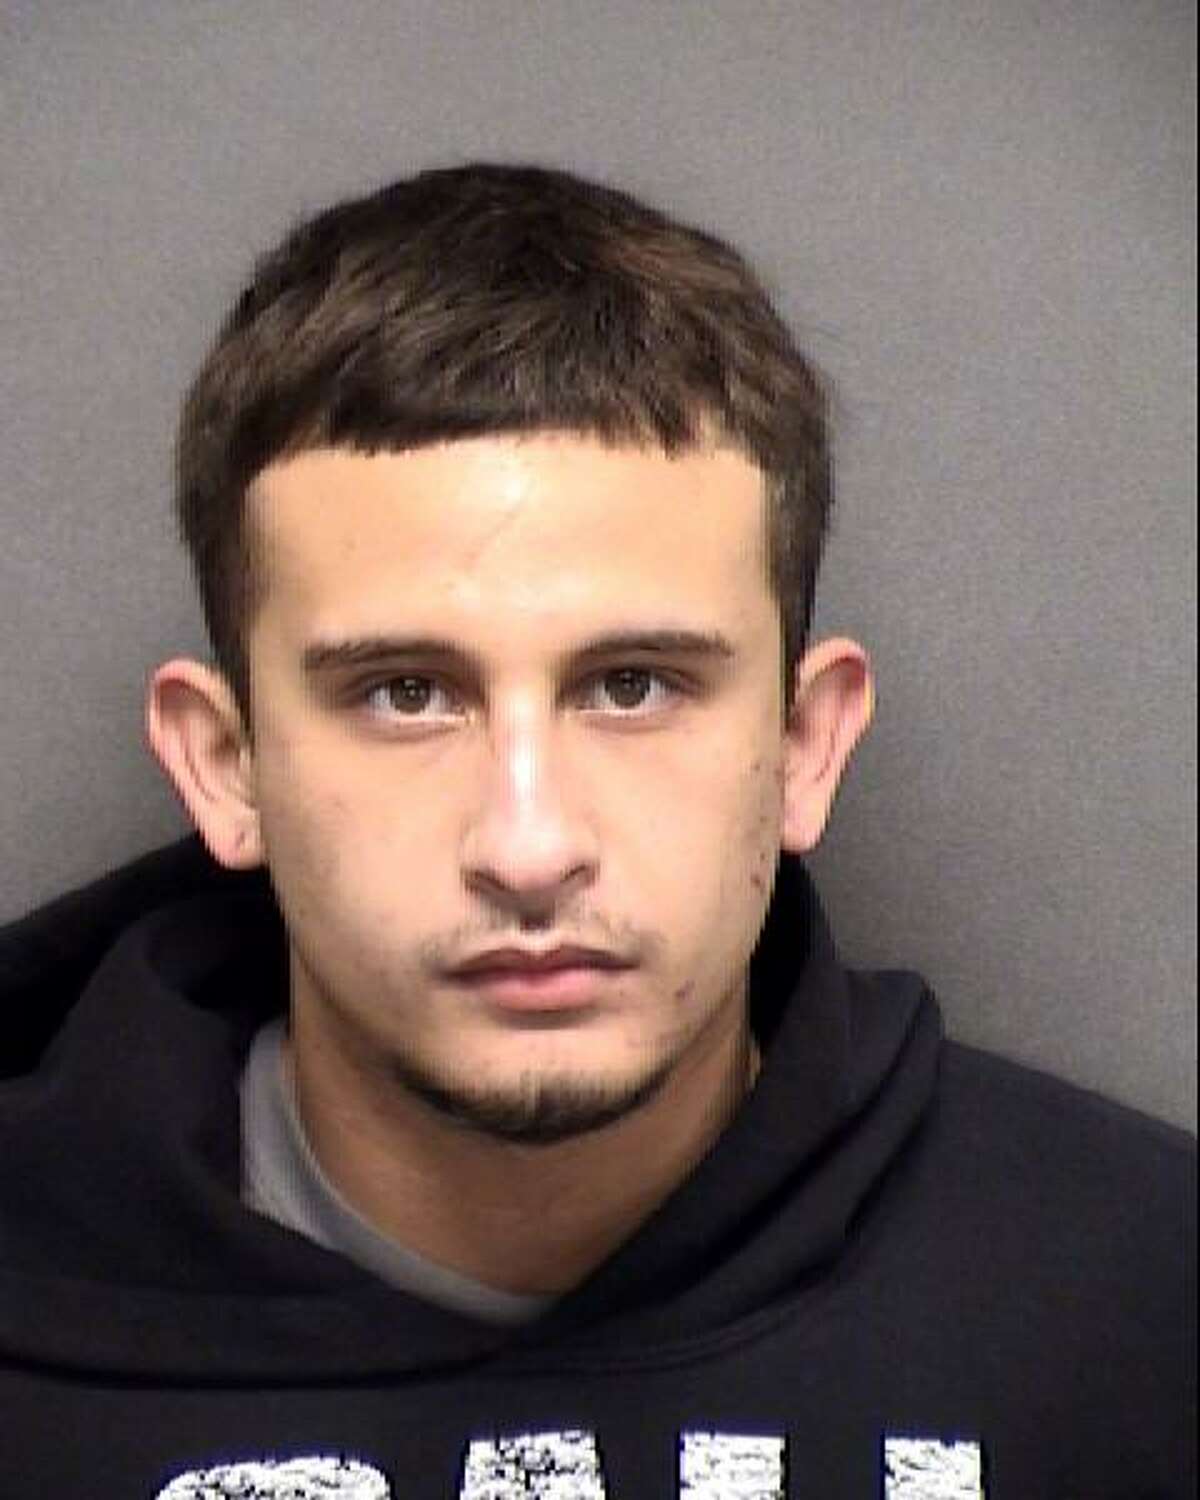 Christopher Chavez, 23, was charged with multiple counts of aggravated assault. His girlfriend told police that he ran over her over with his vehicle and strangled her.